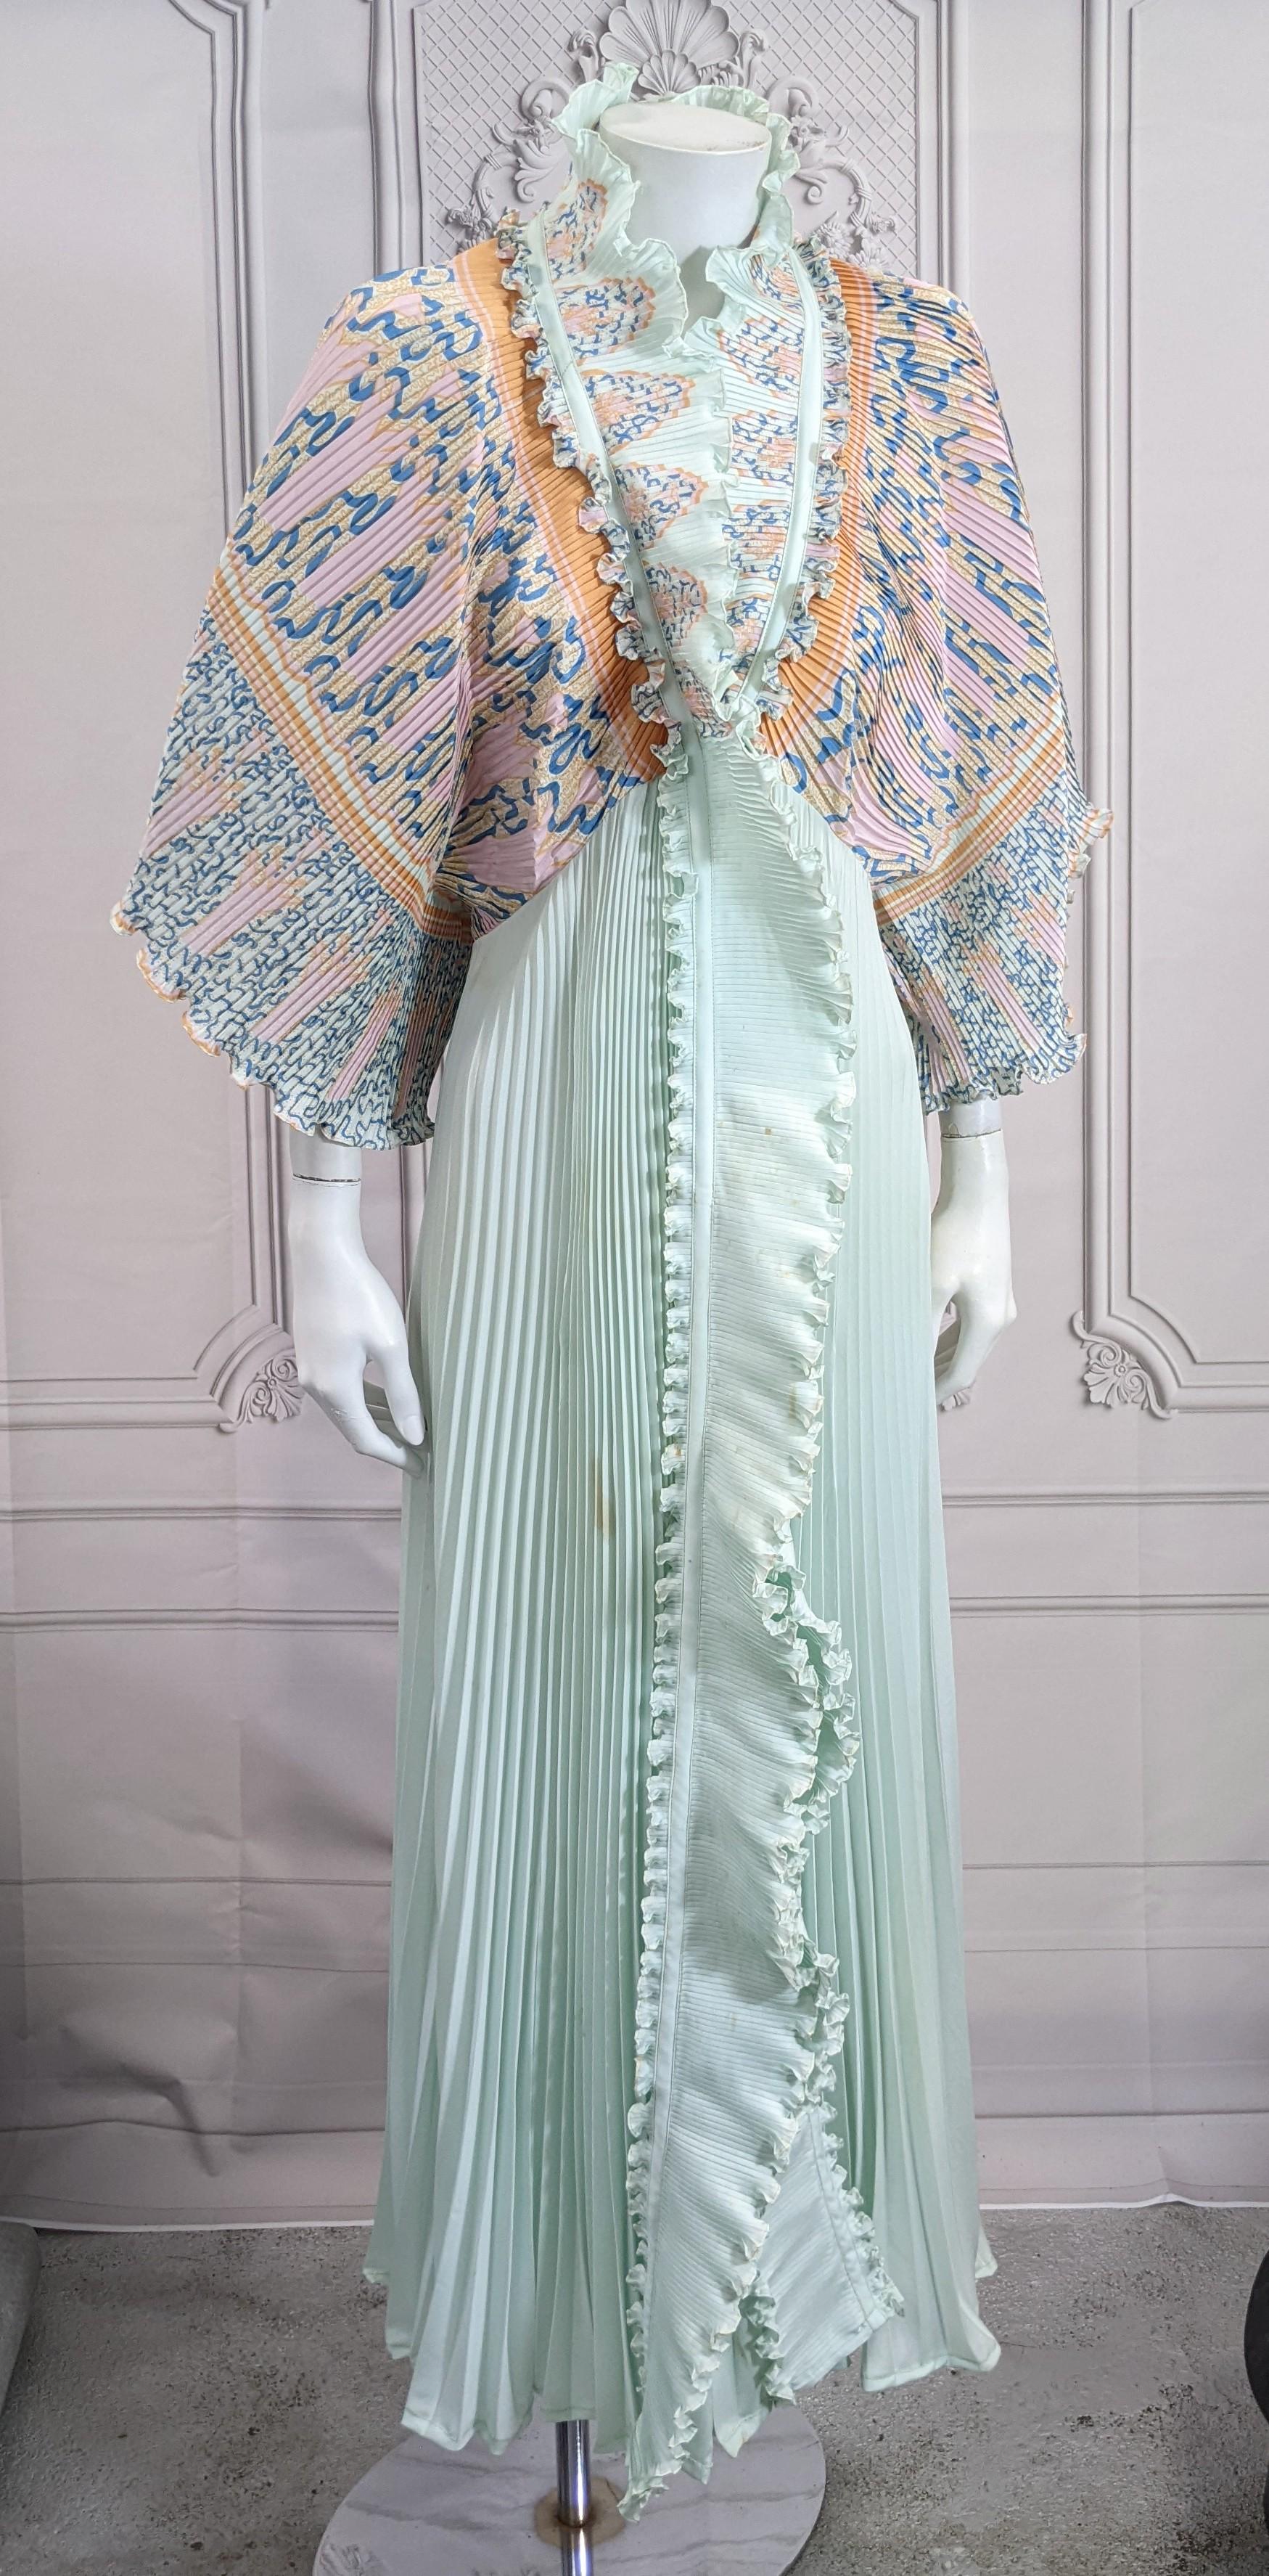 Zandra Rhodes Extravagant Pleated Robe from the 1970's with her signature abstract and Orientalist designs. Fully pleated with large kimono sleeves and full skirt. 
Originally designed as loungewear but now commonly used for day and evening wear.